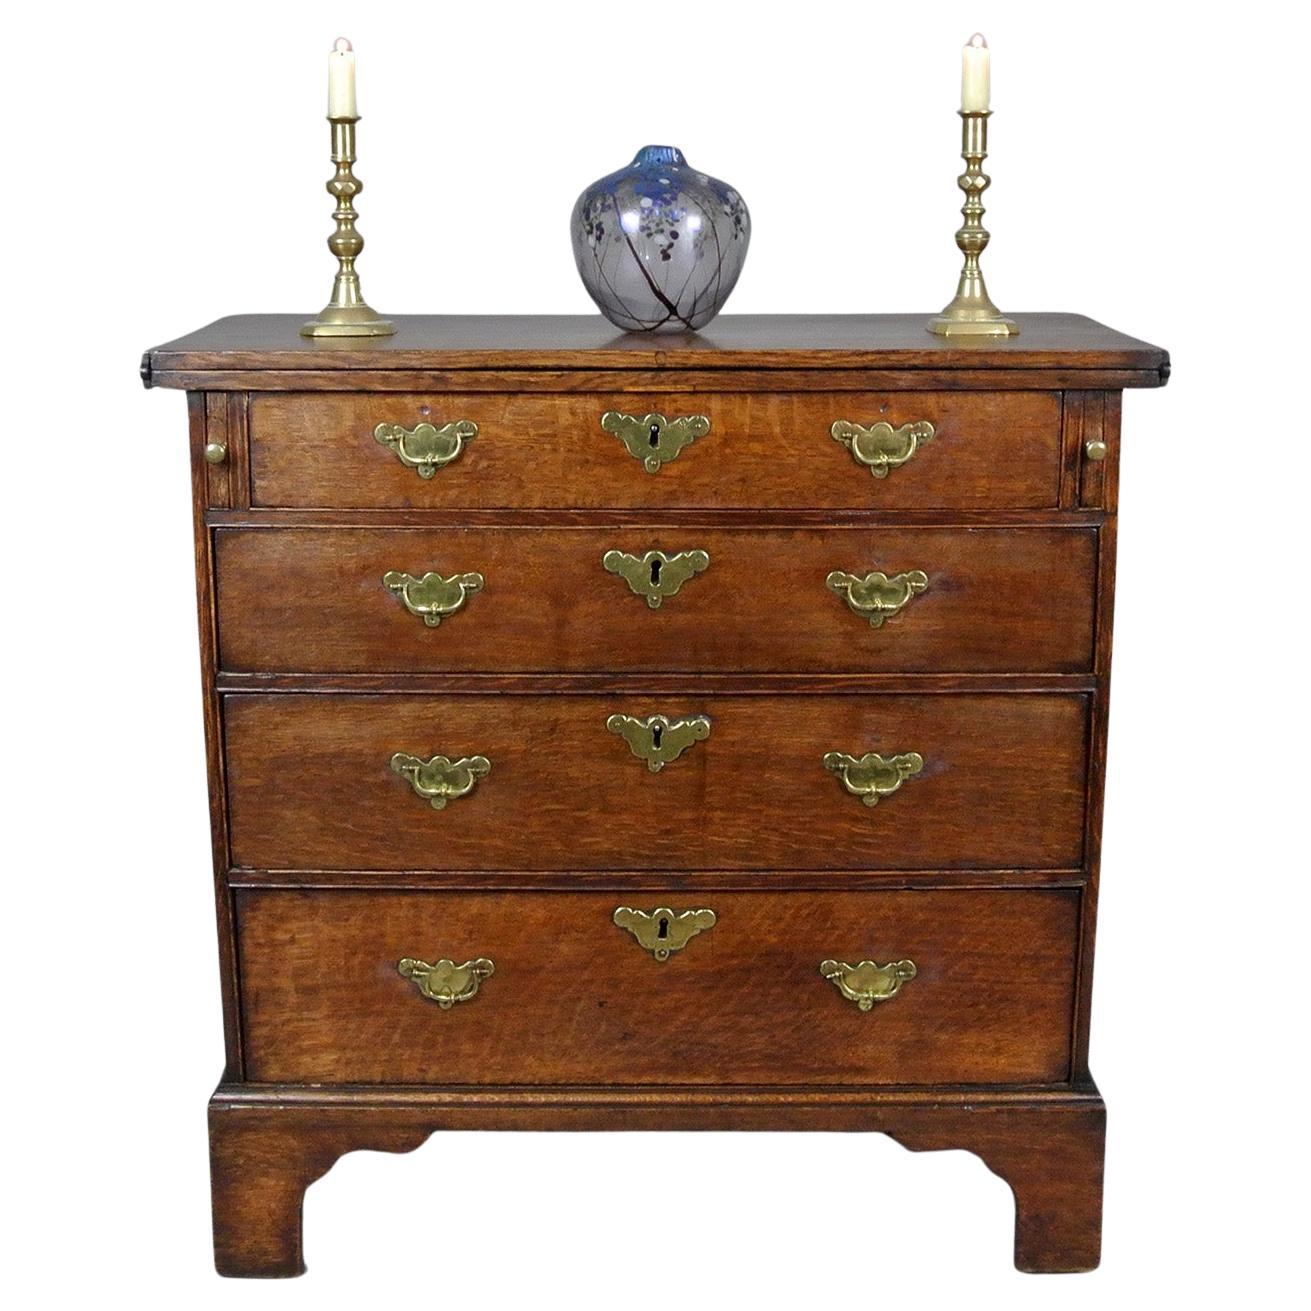 George II Oak Bachelor’s Chest of Small Proportions c. 1740